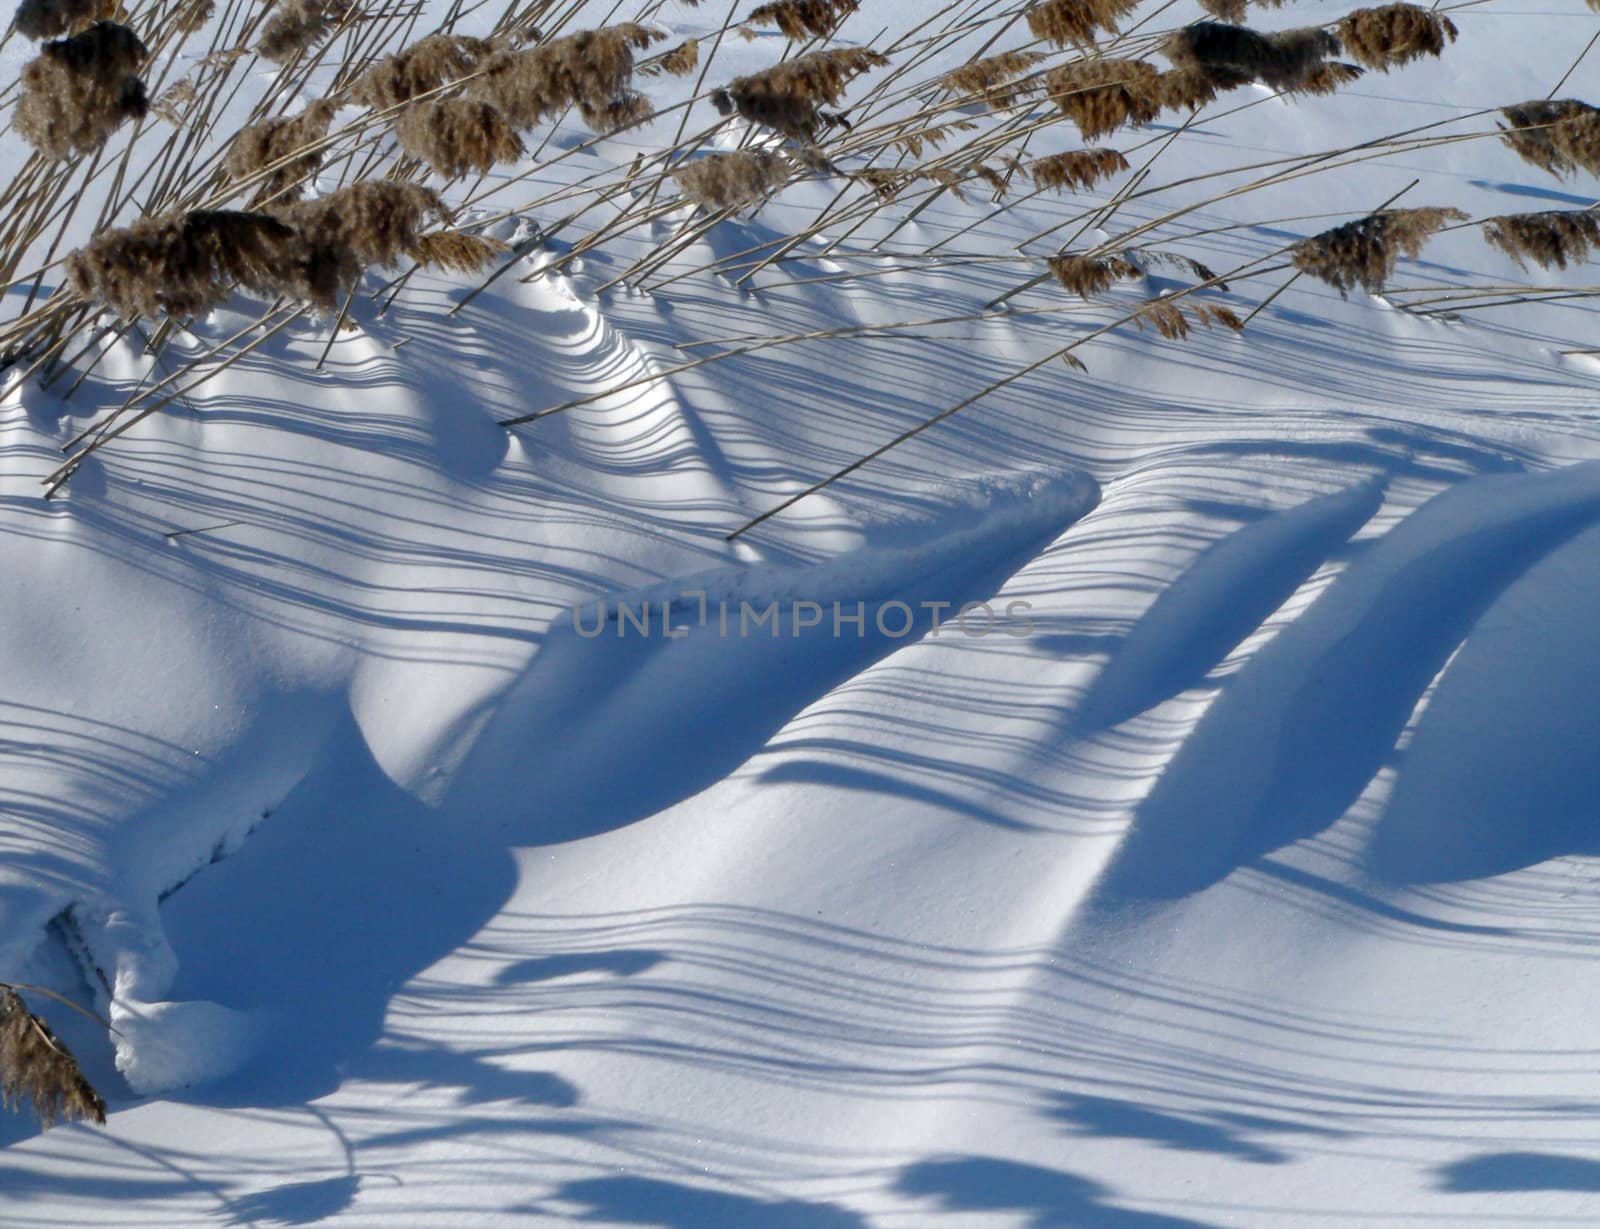 The Shade of the reed on snow.